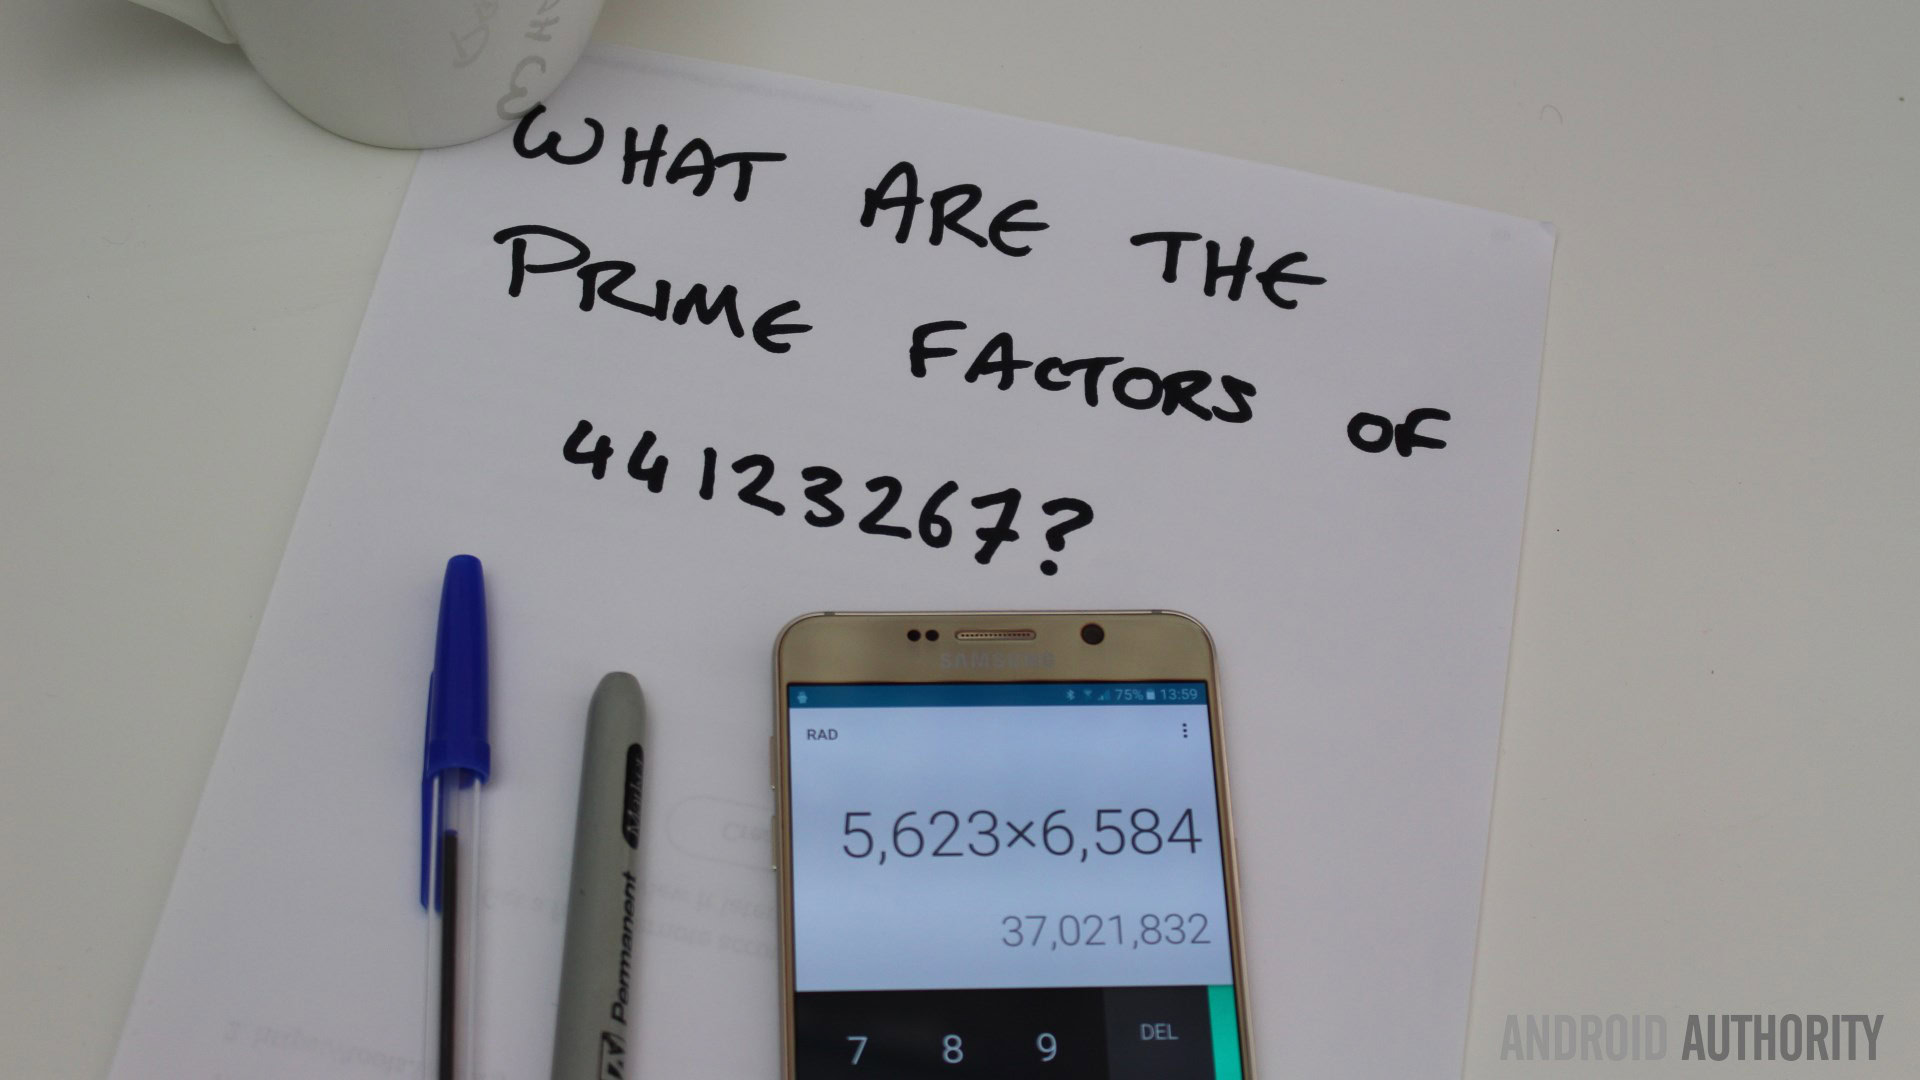 what-are-prime-factors-of-44123267